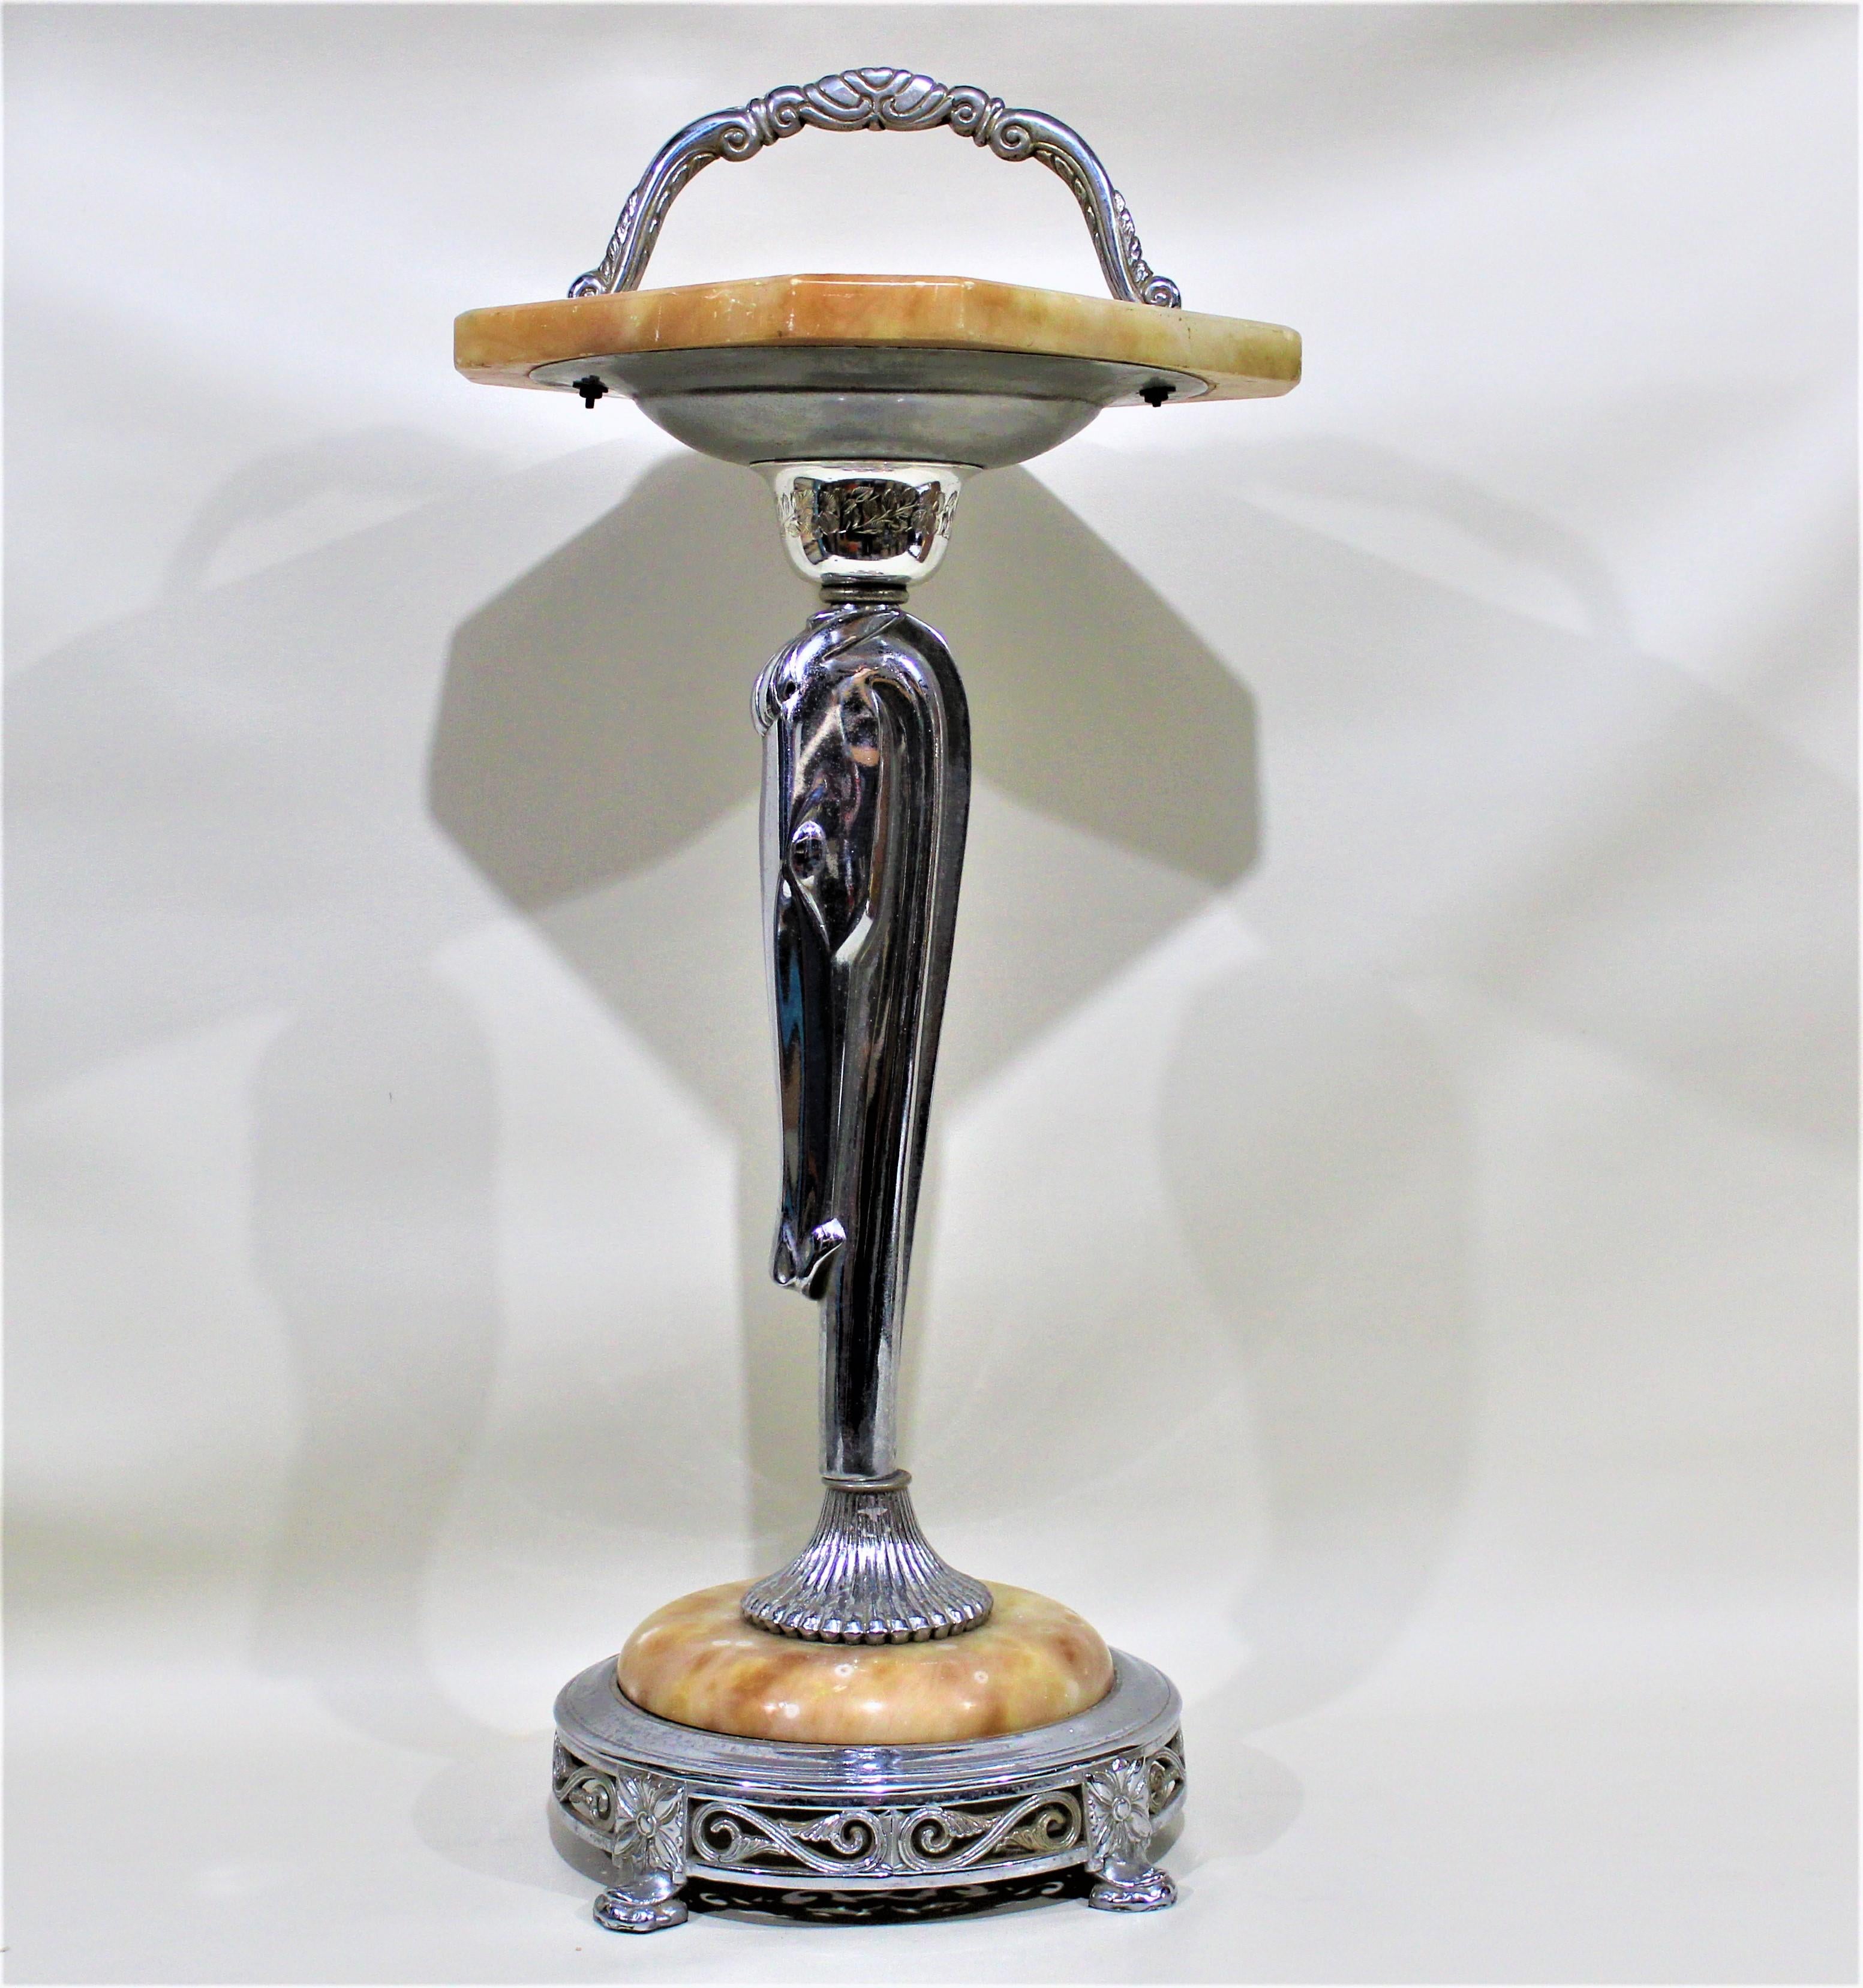 Dating from the mid-20th century, and done in an Art Deco style, this chrome and alabaster smoking Stand or accent table features a stylized figural chrome horse head which constitutes the table's leg that supports an alabaster swivel top with a